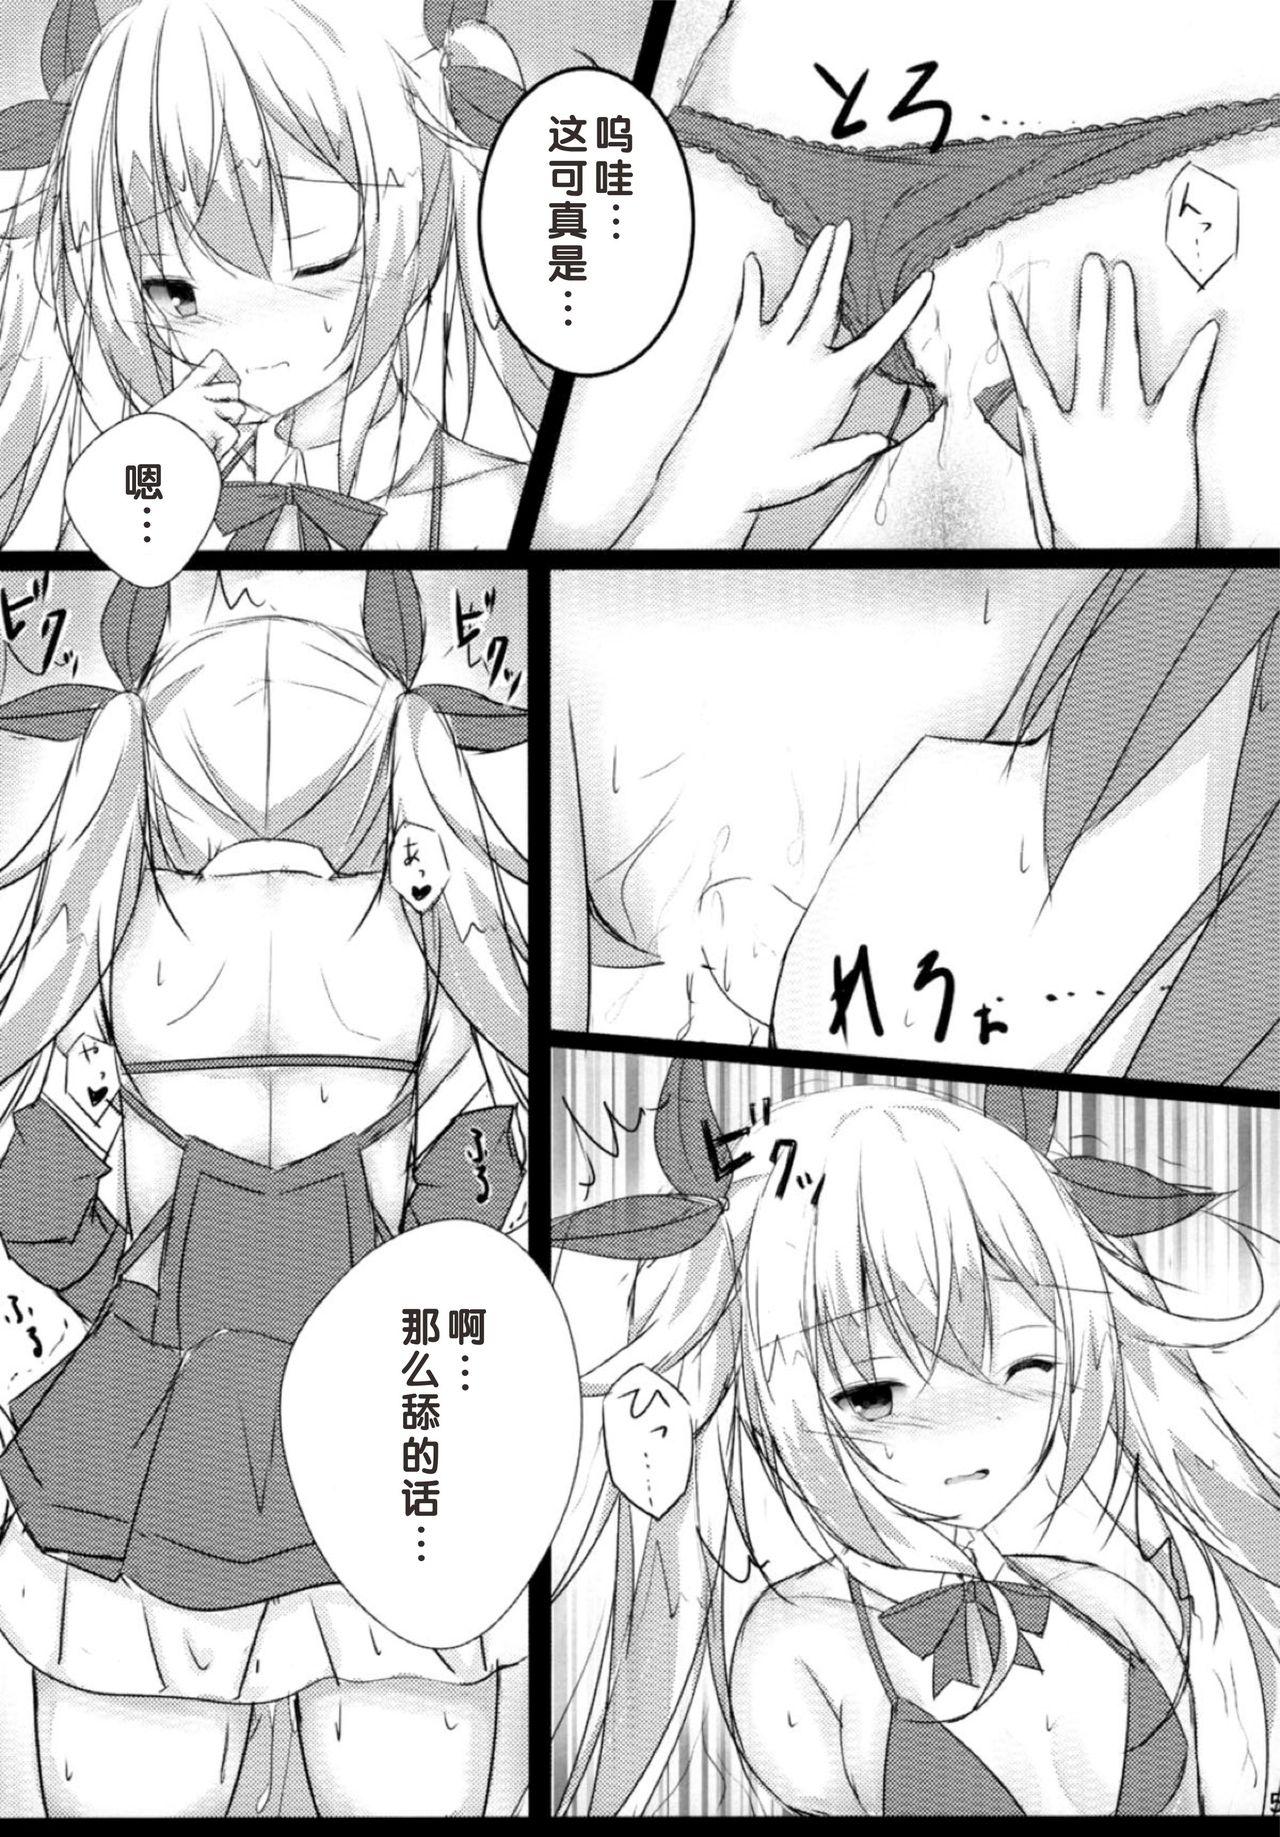 18 Year Old Porn Tsunderempire - Azur lane Lovers - Page 7